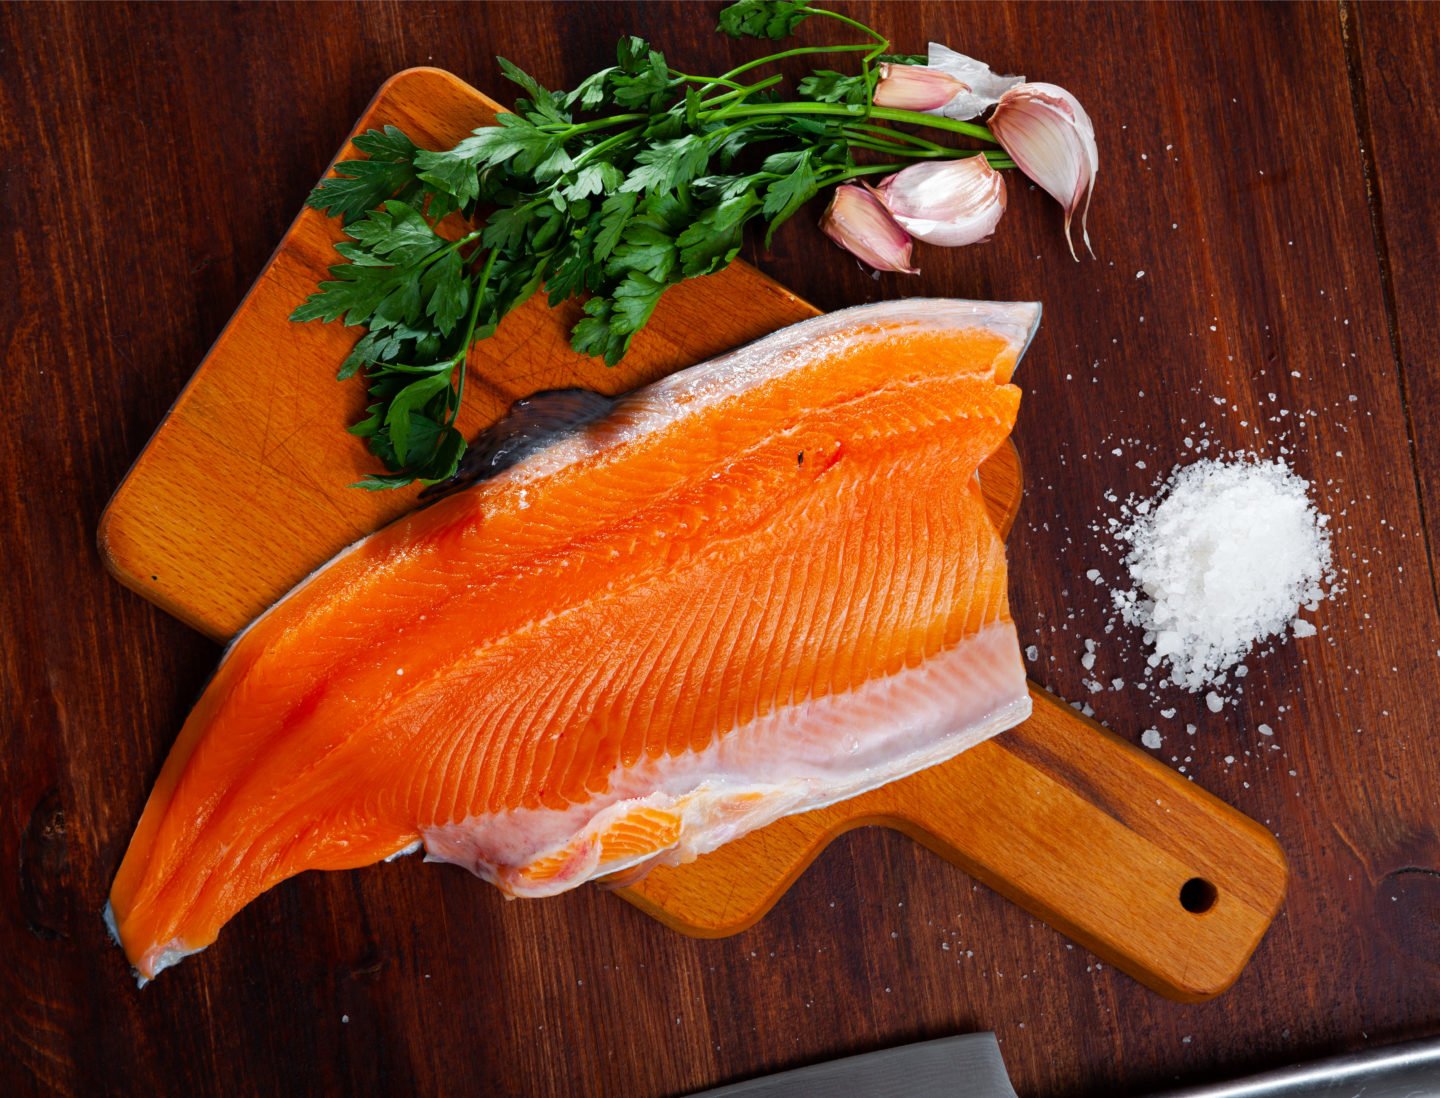 Raw Trout Fillet On Cutting Board